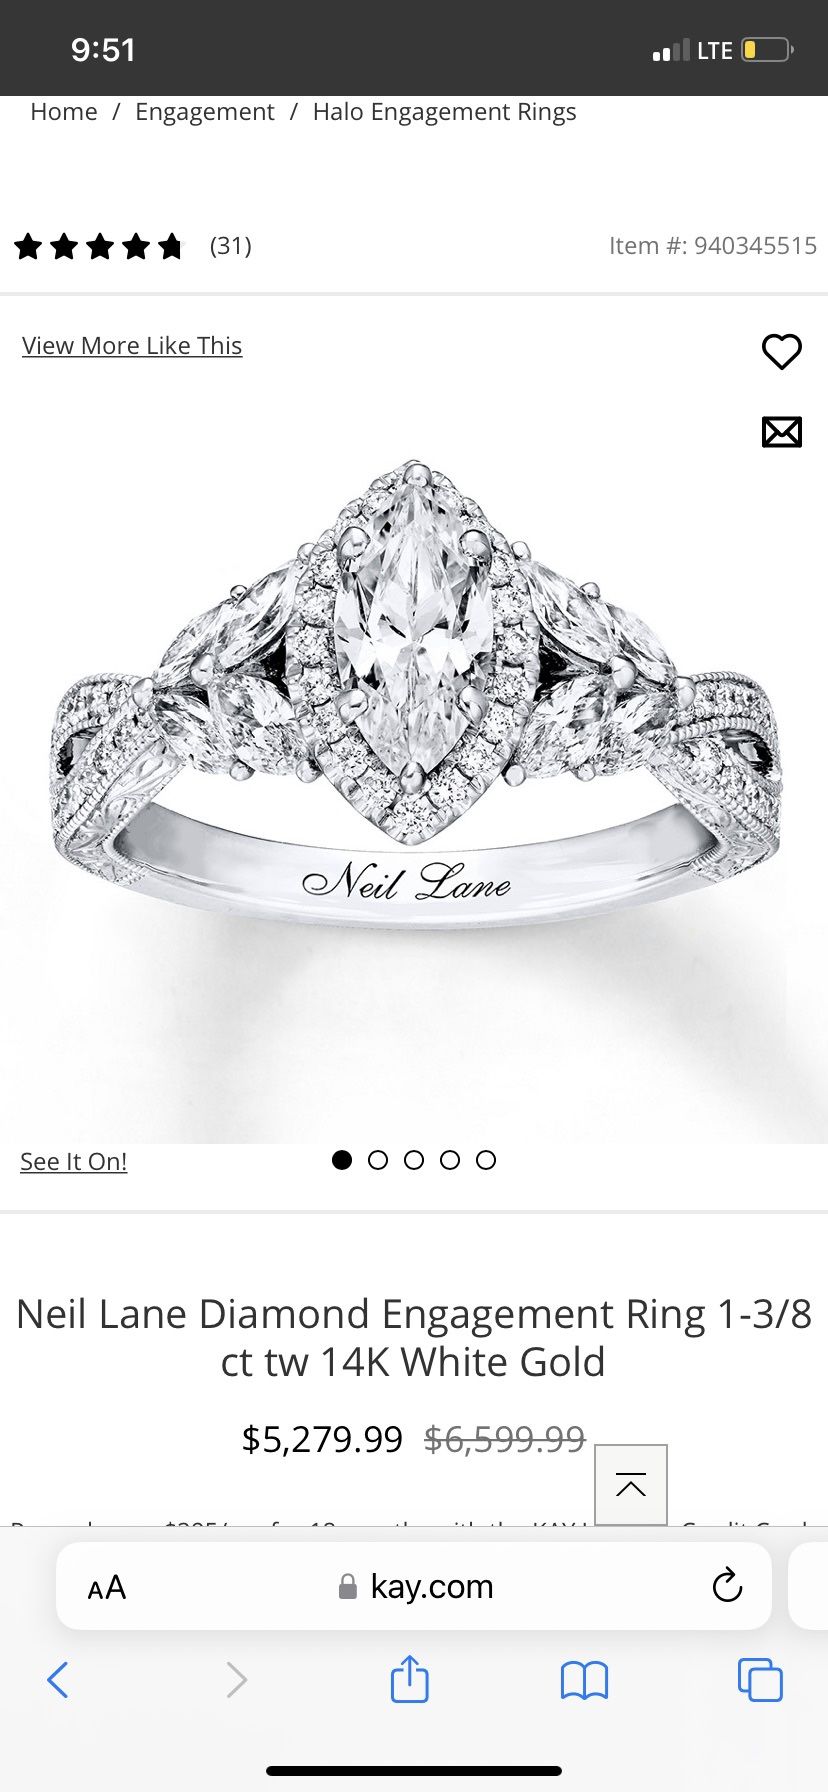 Neil Lane Engagement Ring Details And Original Price Are In One Of The Pictures